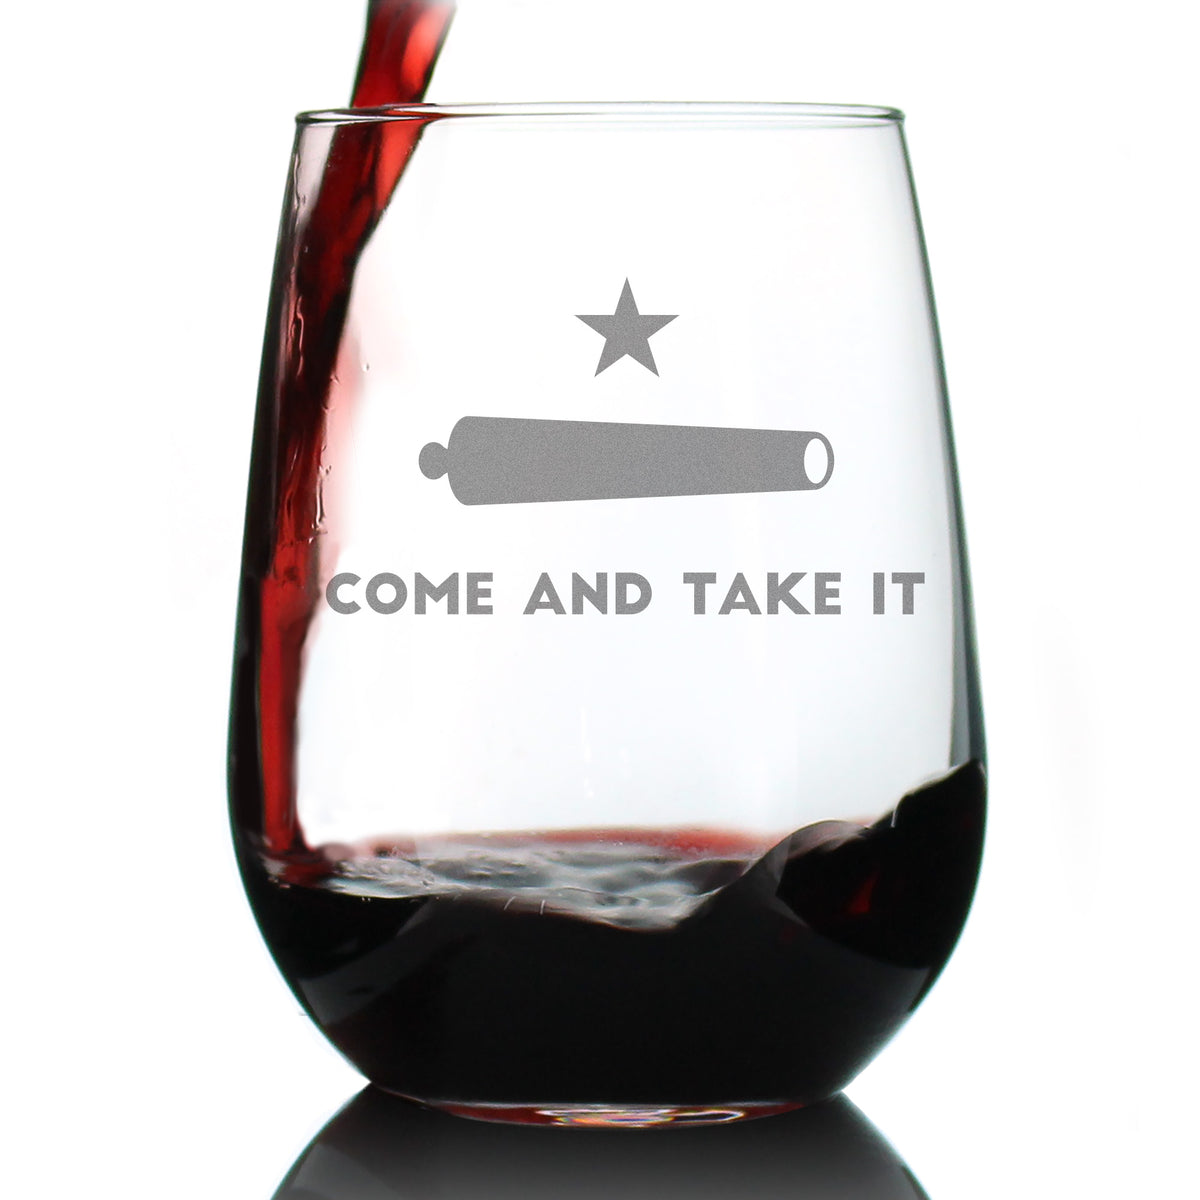 Come and Take It Texas Flag Stemless Wine Glass - Large 17 oz - Unique Engraved Glassware Art Gifts for Texans